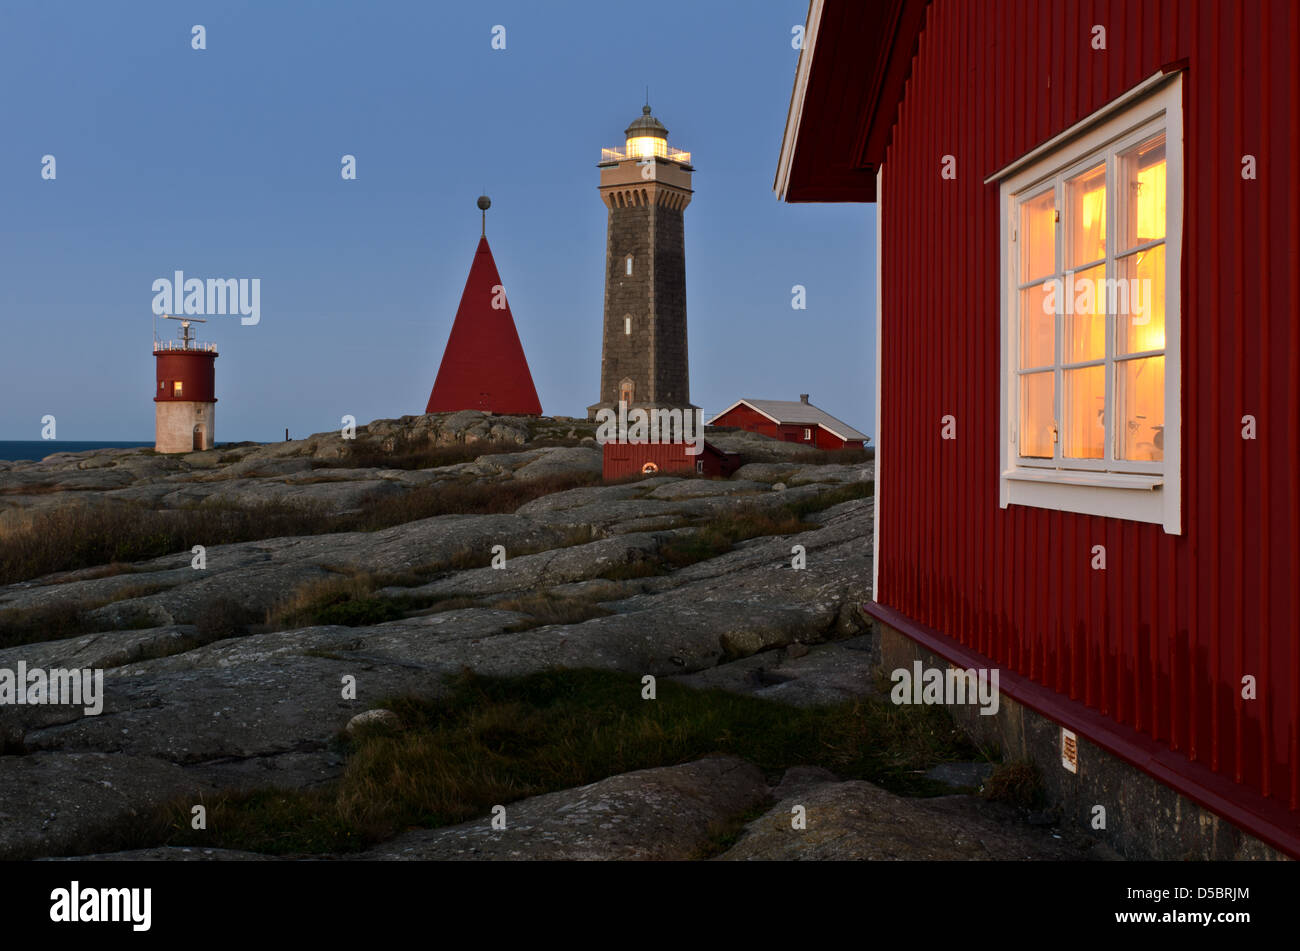 Lighthouse and wooden buildings in Vinga, Gothenburg, Sweden, Europe Stock Photo